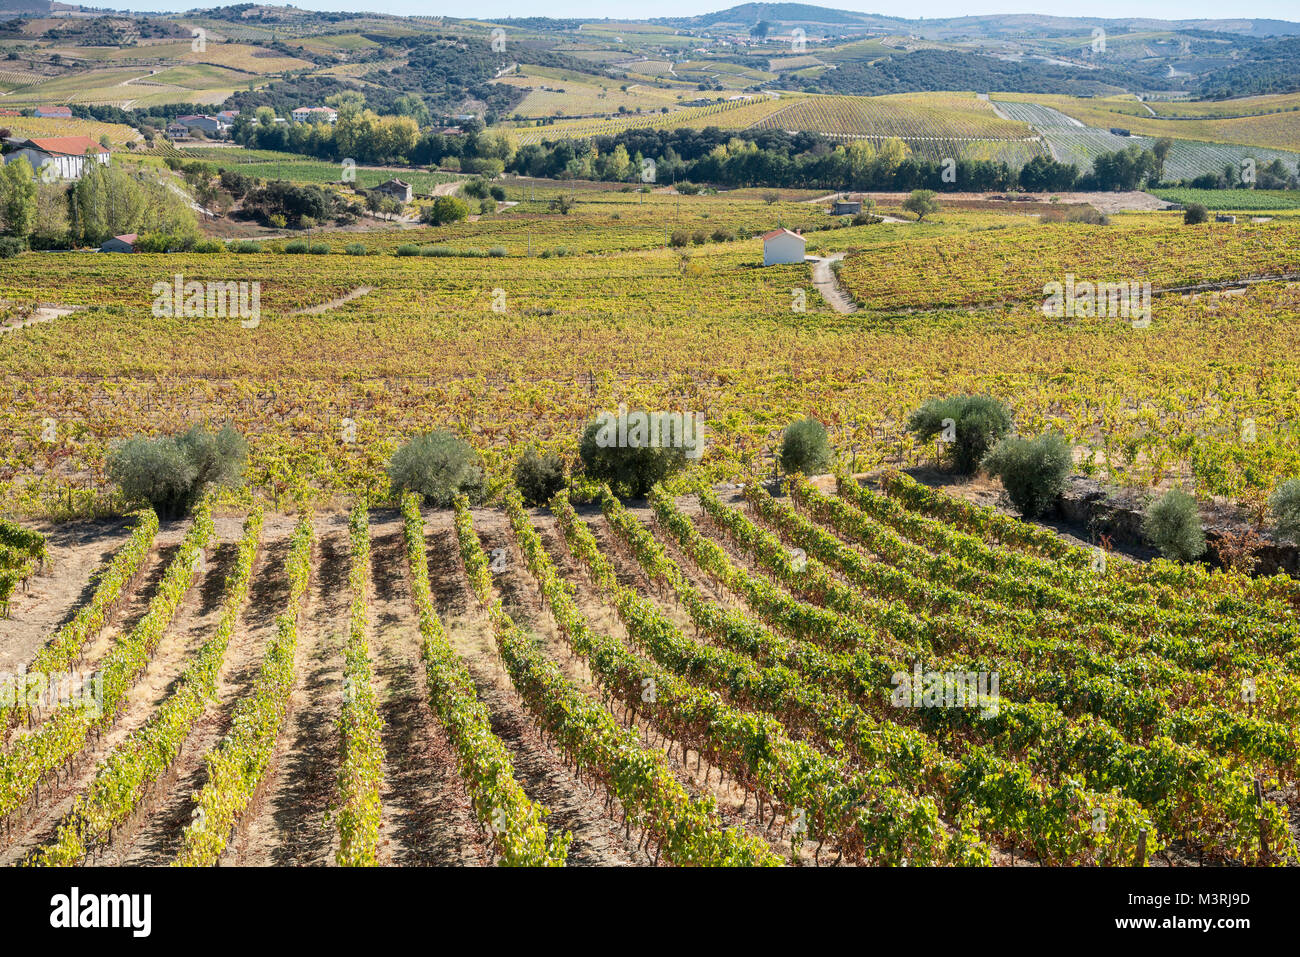 Vinyards on the slopes between Horta and Sebadelhe, In the Alto Douro wine region, Northern Portugal Stock Photo